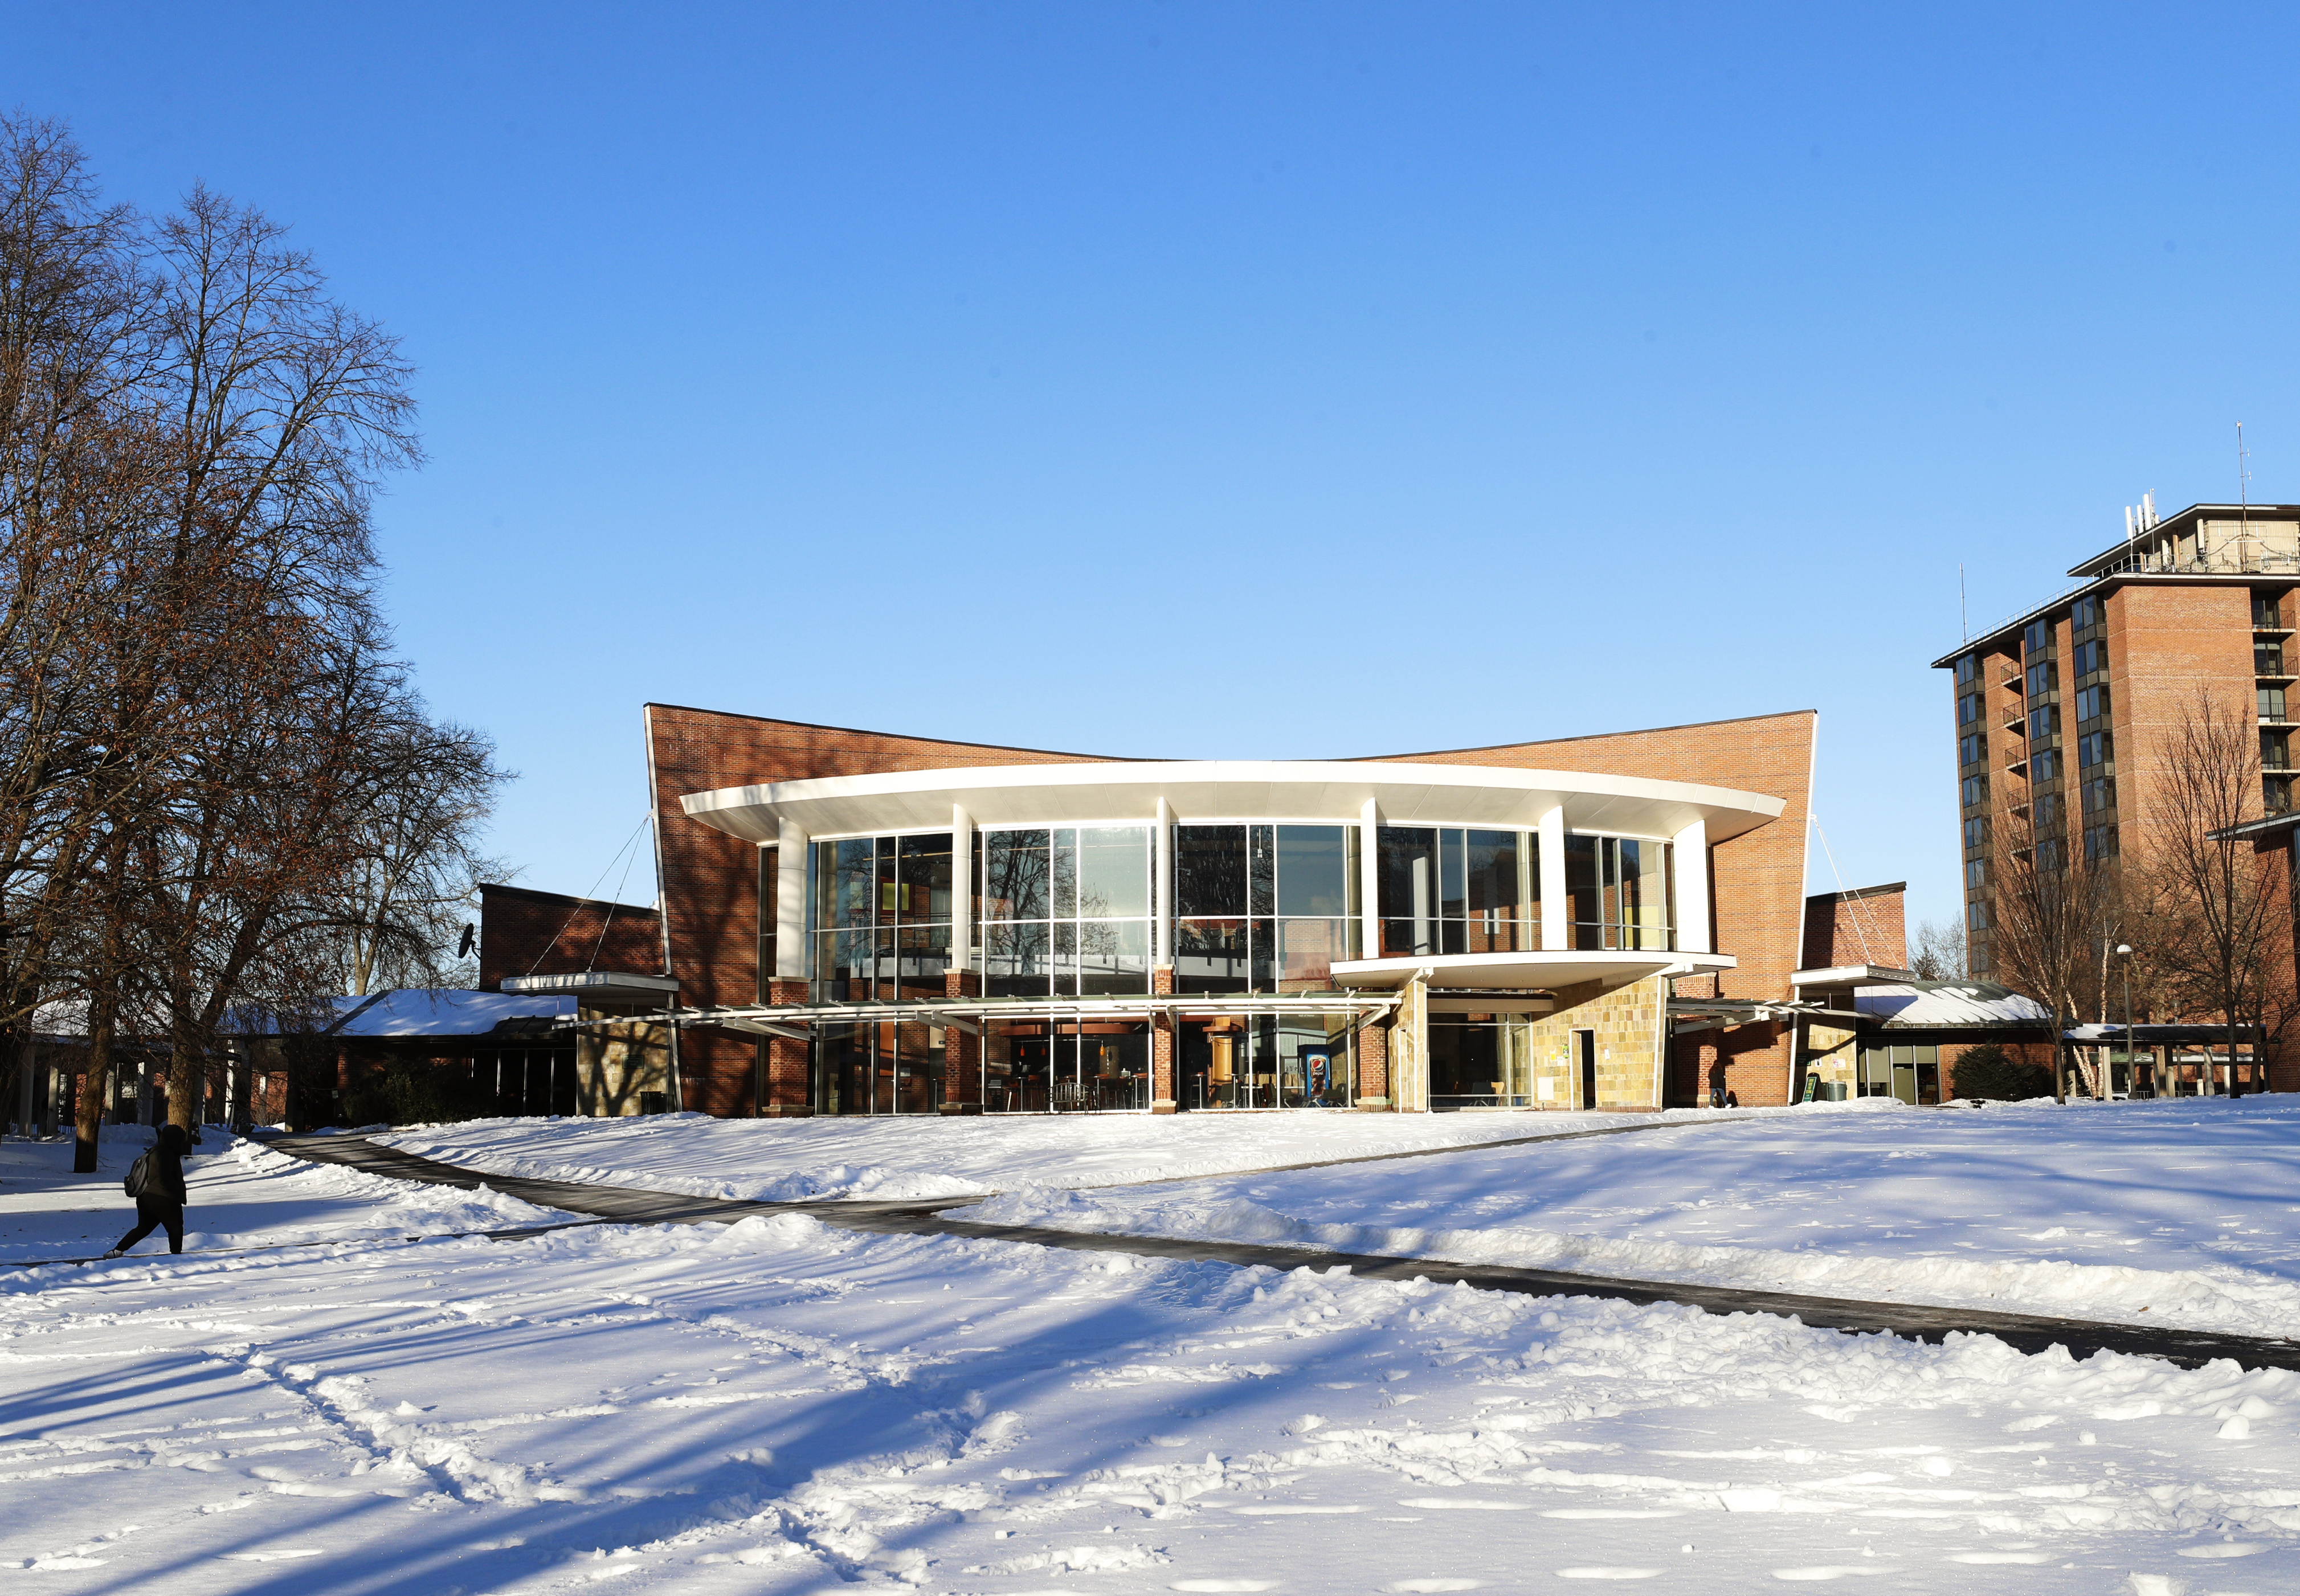 Skidmore’s beautiful campus, capped with snow, continues to inspire.  